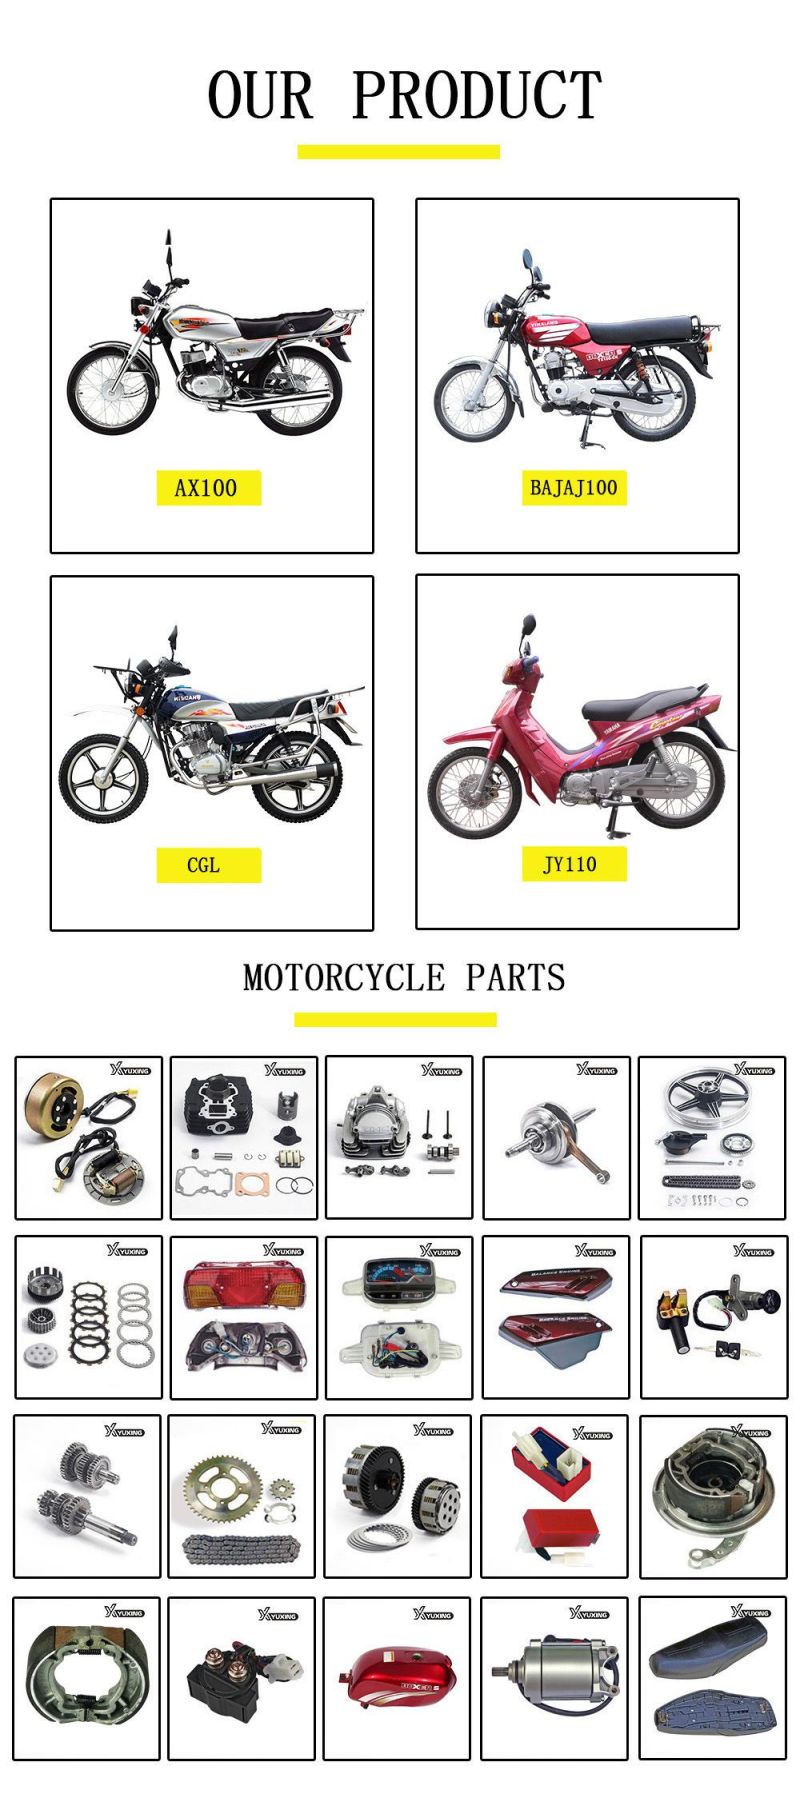 Hot Selling Motorcycle Parts Chain and Sprocket for Bajaj100